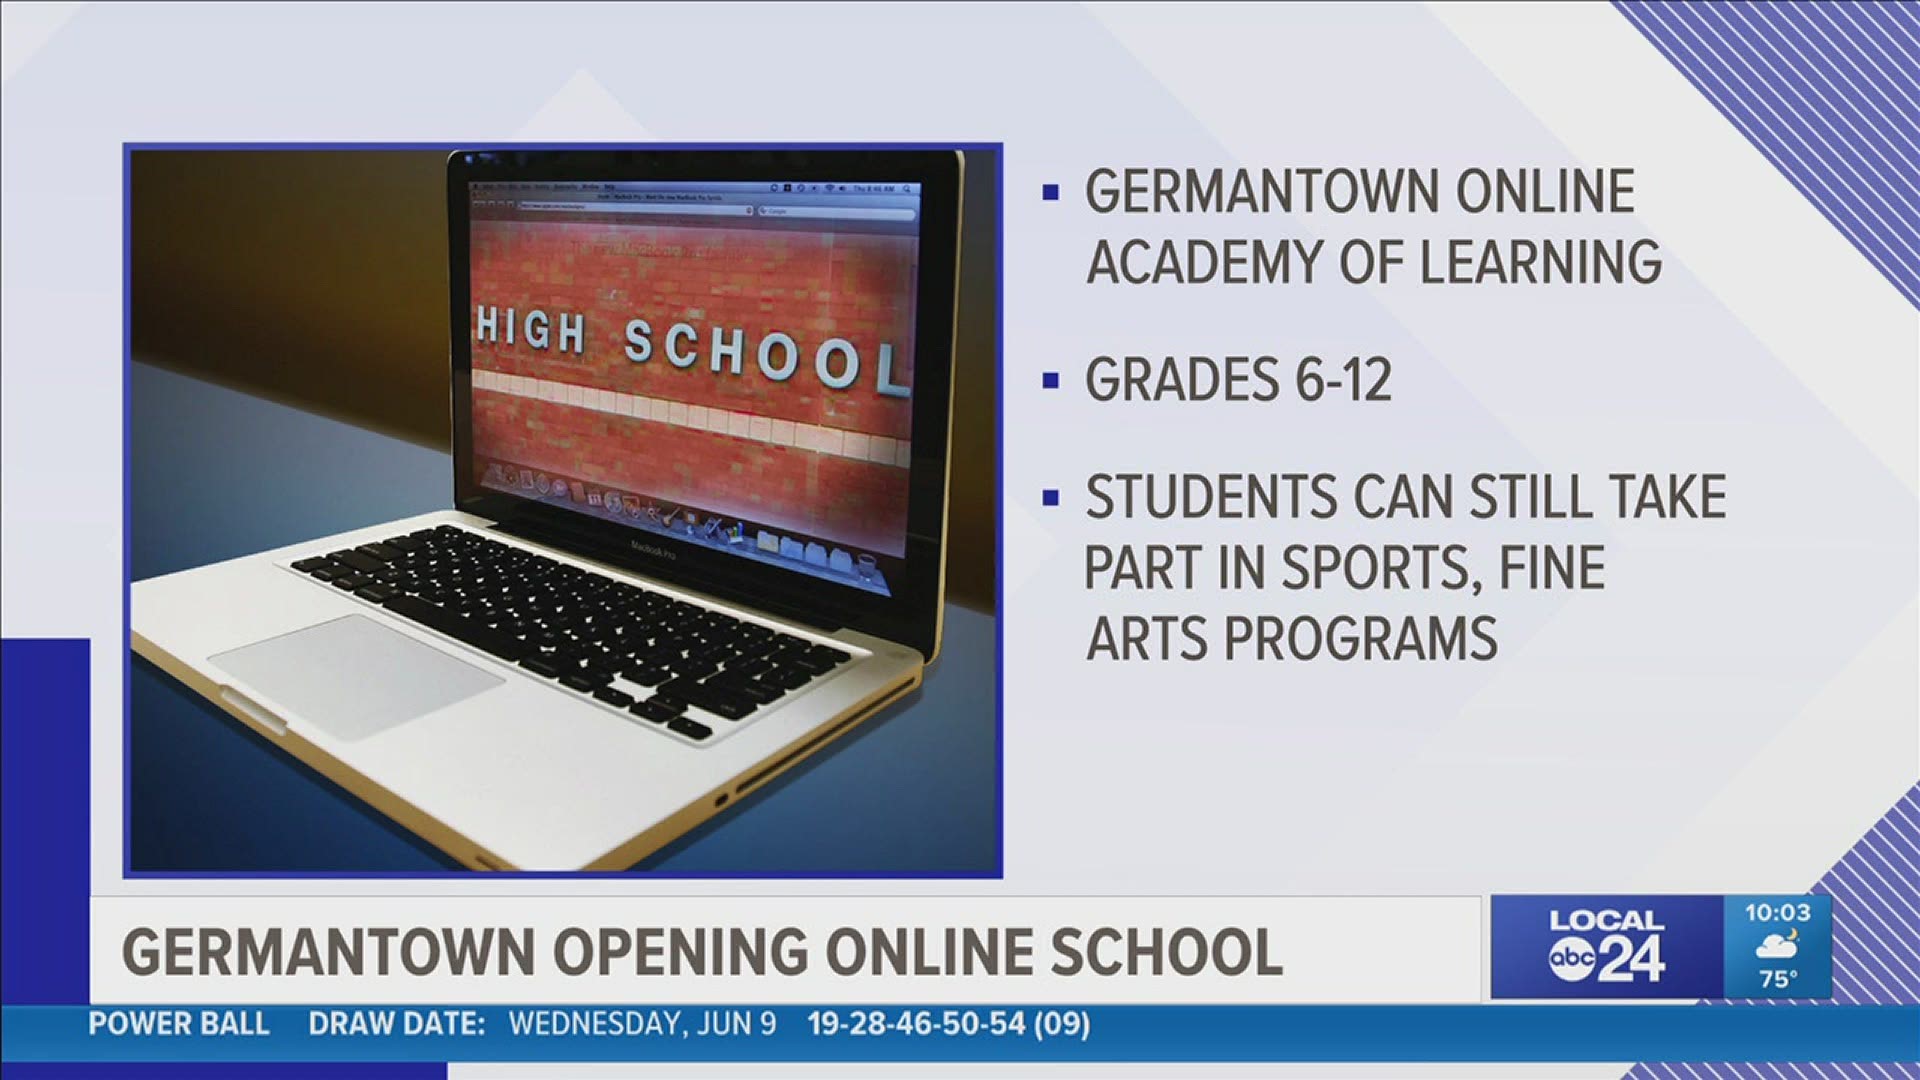 Germantown Online Academy of Learning will open in August.